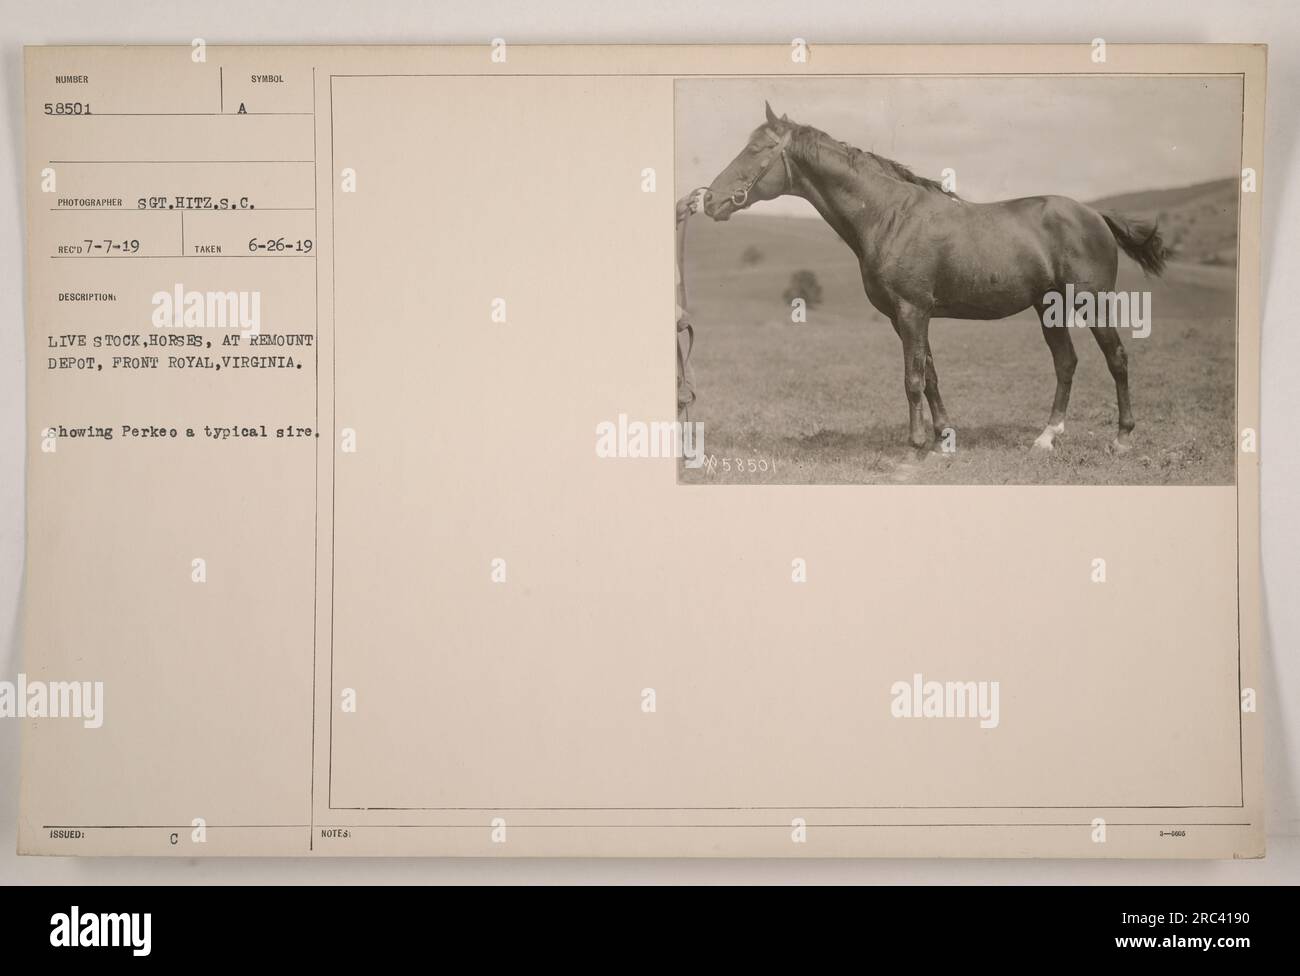 Image of live stock horses at the Remount Depot in Front Royal, Virginia. Taken by Sgt. Hitz on July 7, 1919. The picture showcases Perk, a representative sire. Note: The identification number of the photograph is 58501. Stock Photo